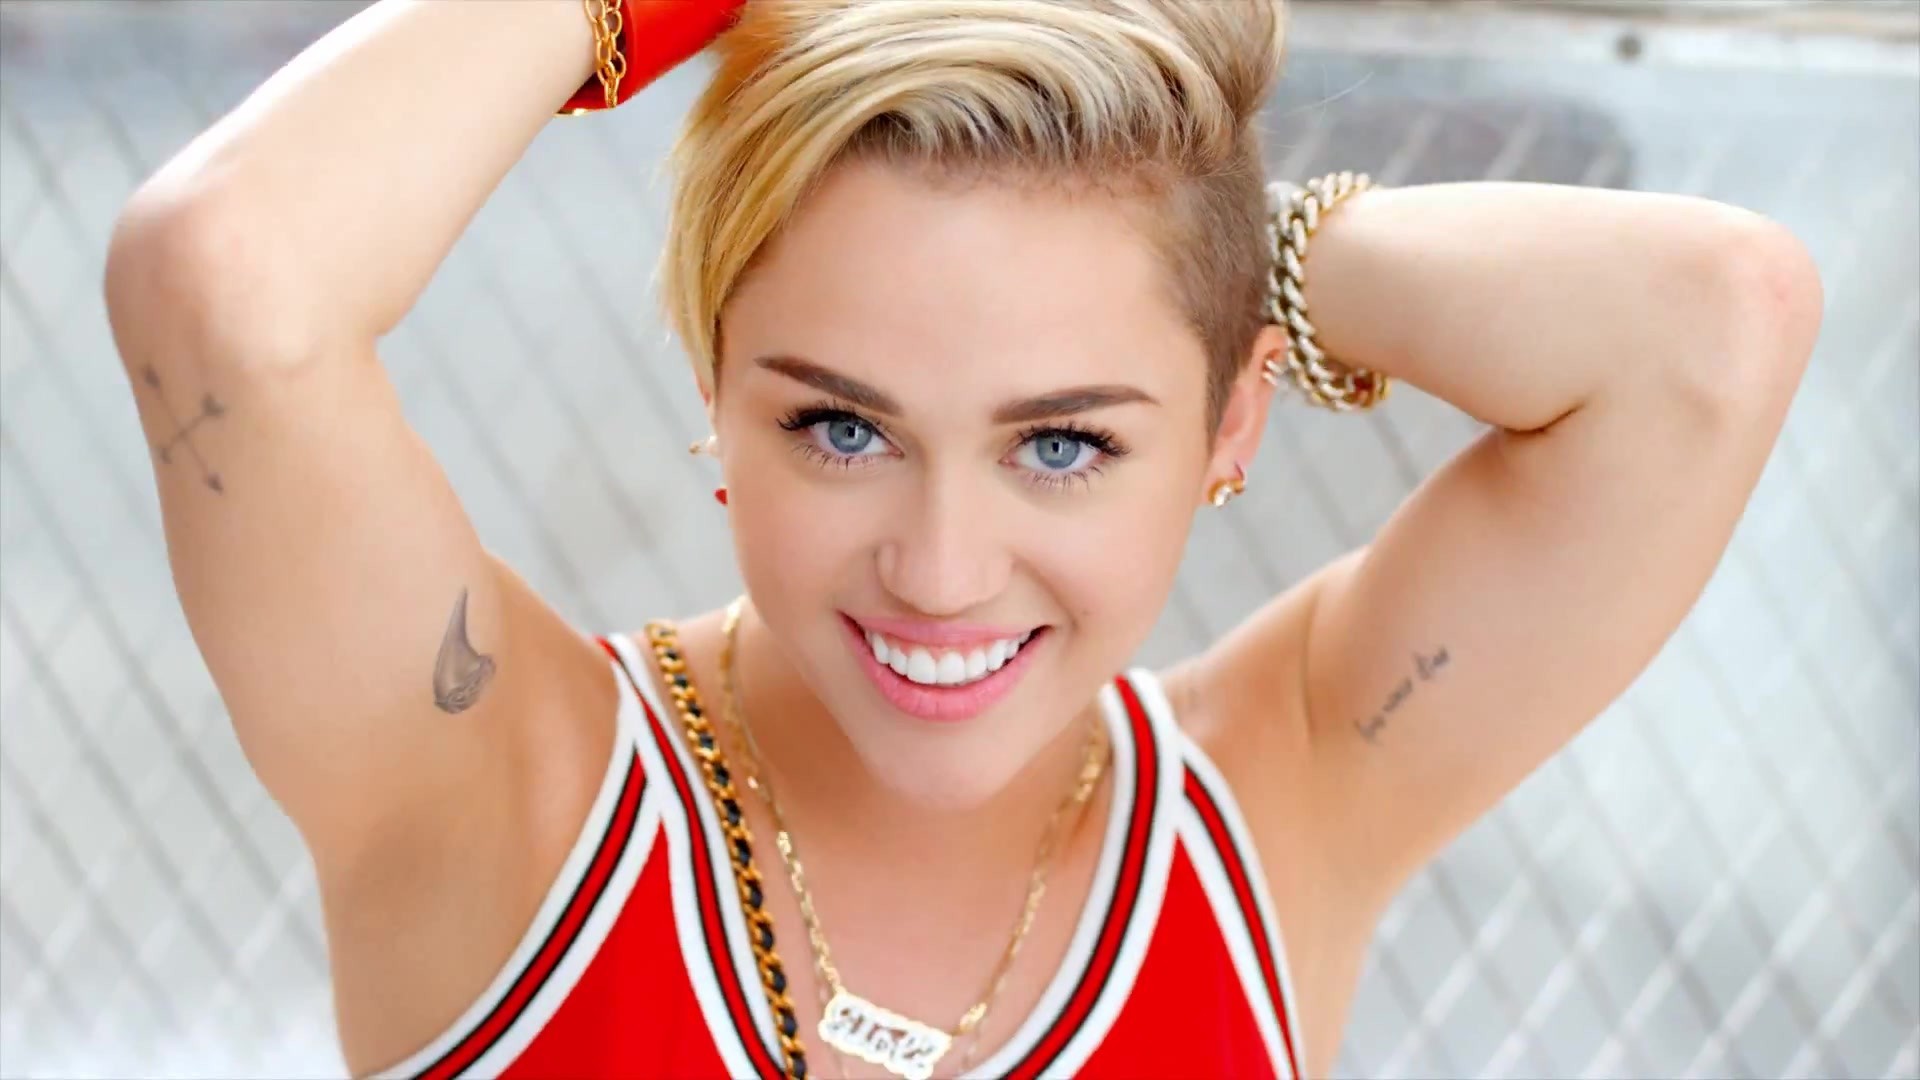 1920x1080 Funny Miley Cyrus Celebrity 12 High Resolution Wallpaper